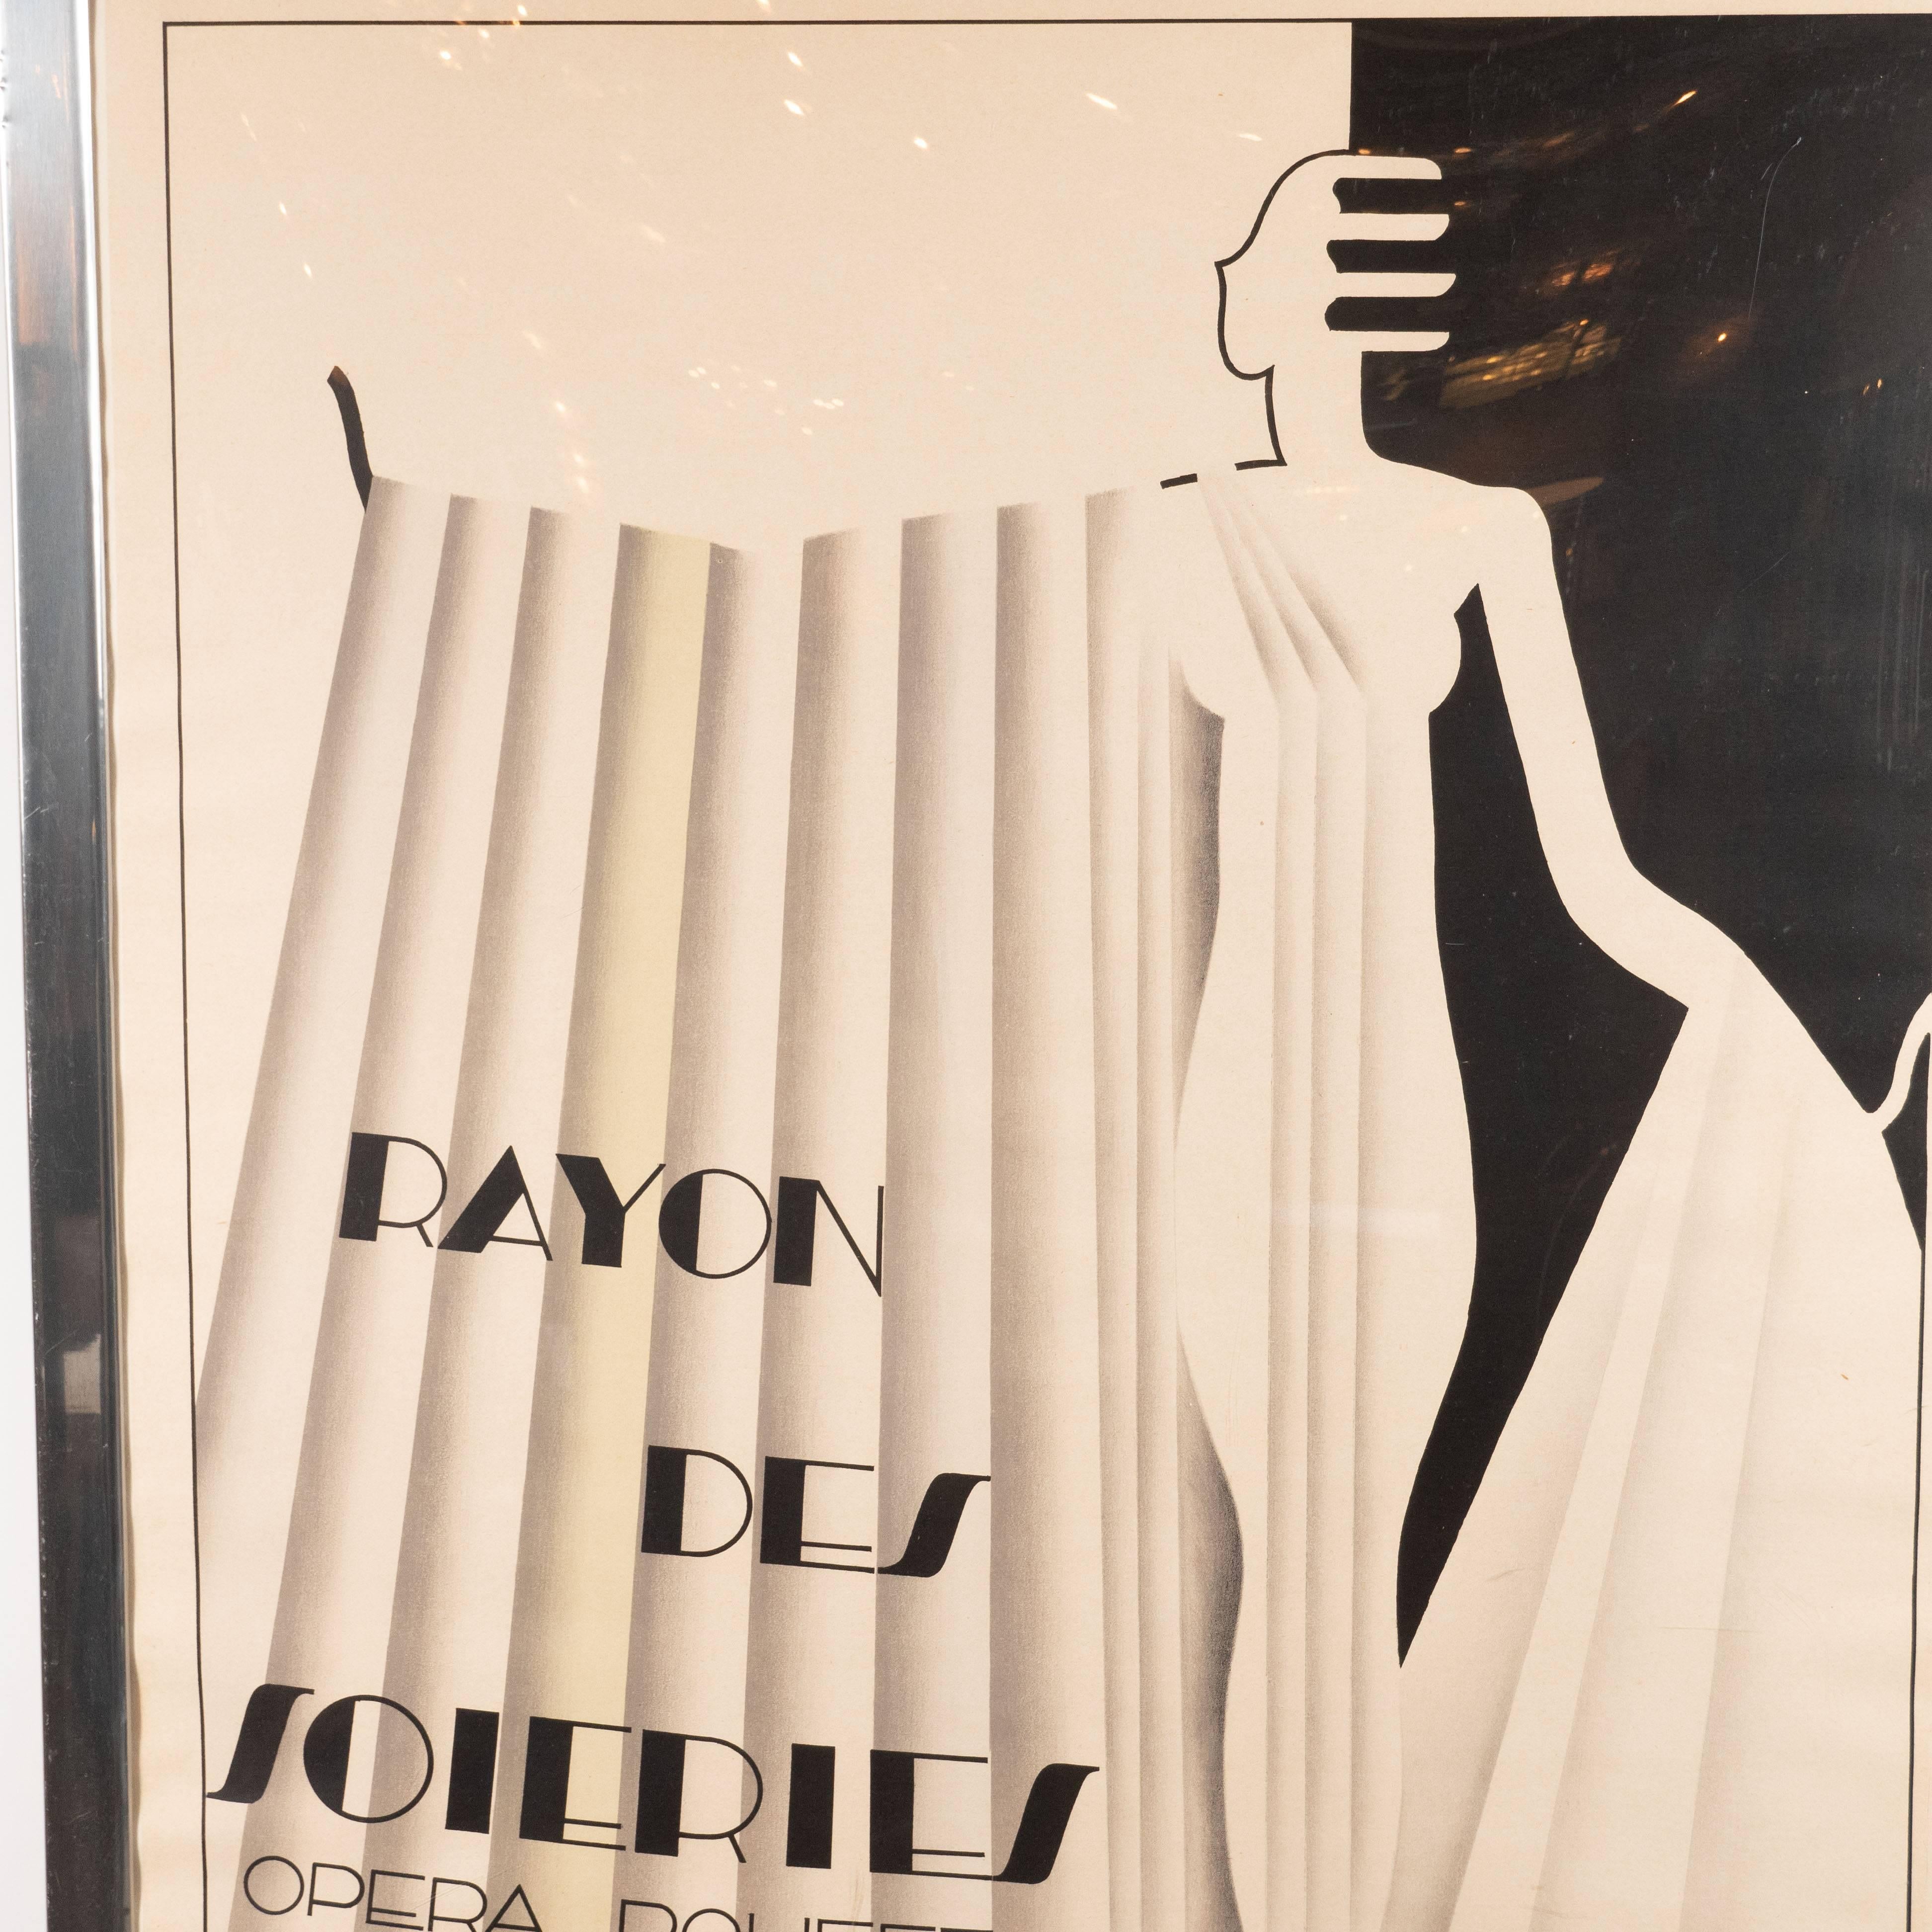 French Art Deco Rayon Des Soieries Opera Bouffe Lithograph by Maurice Dufrène For Sale